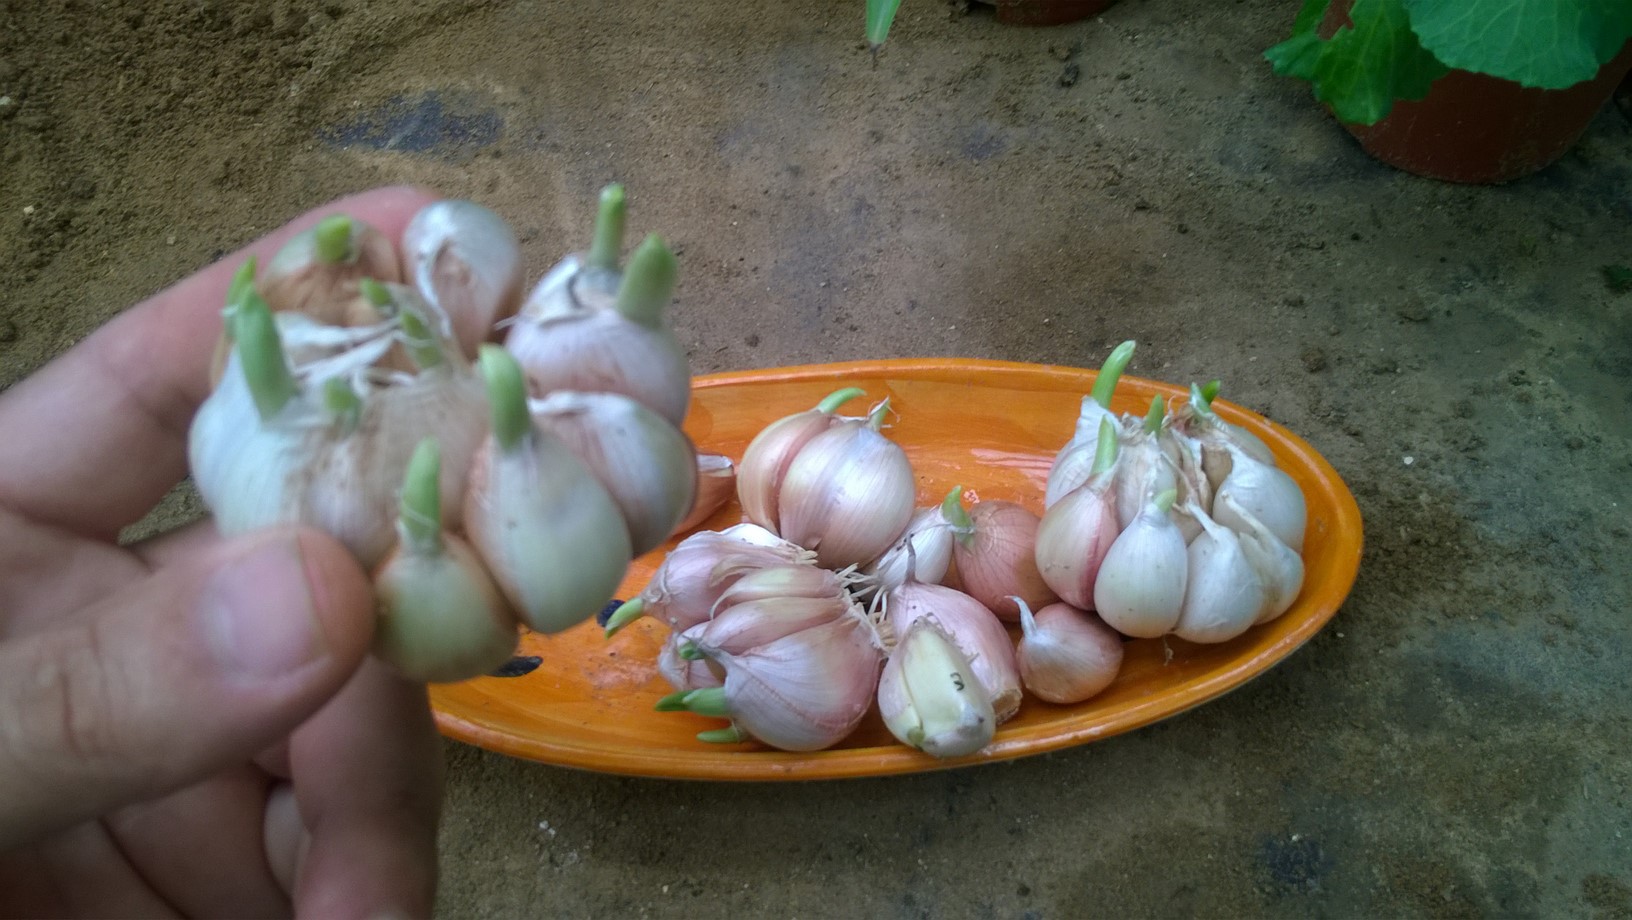 Planting garlic cloves is relatively simple.